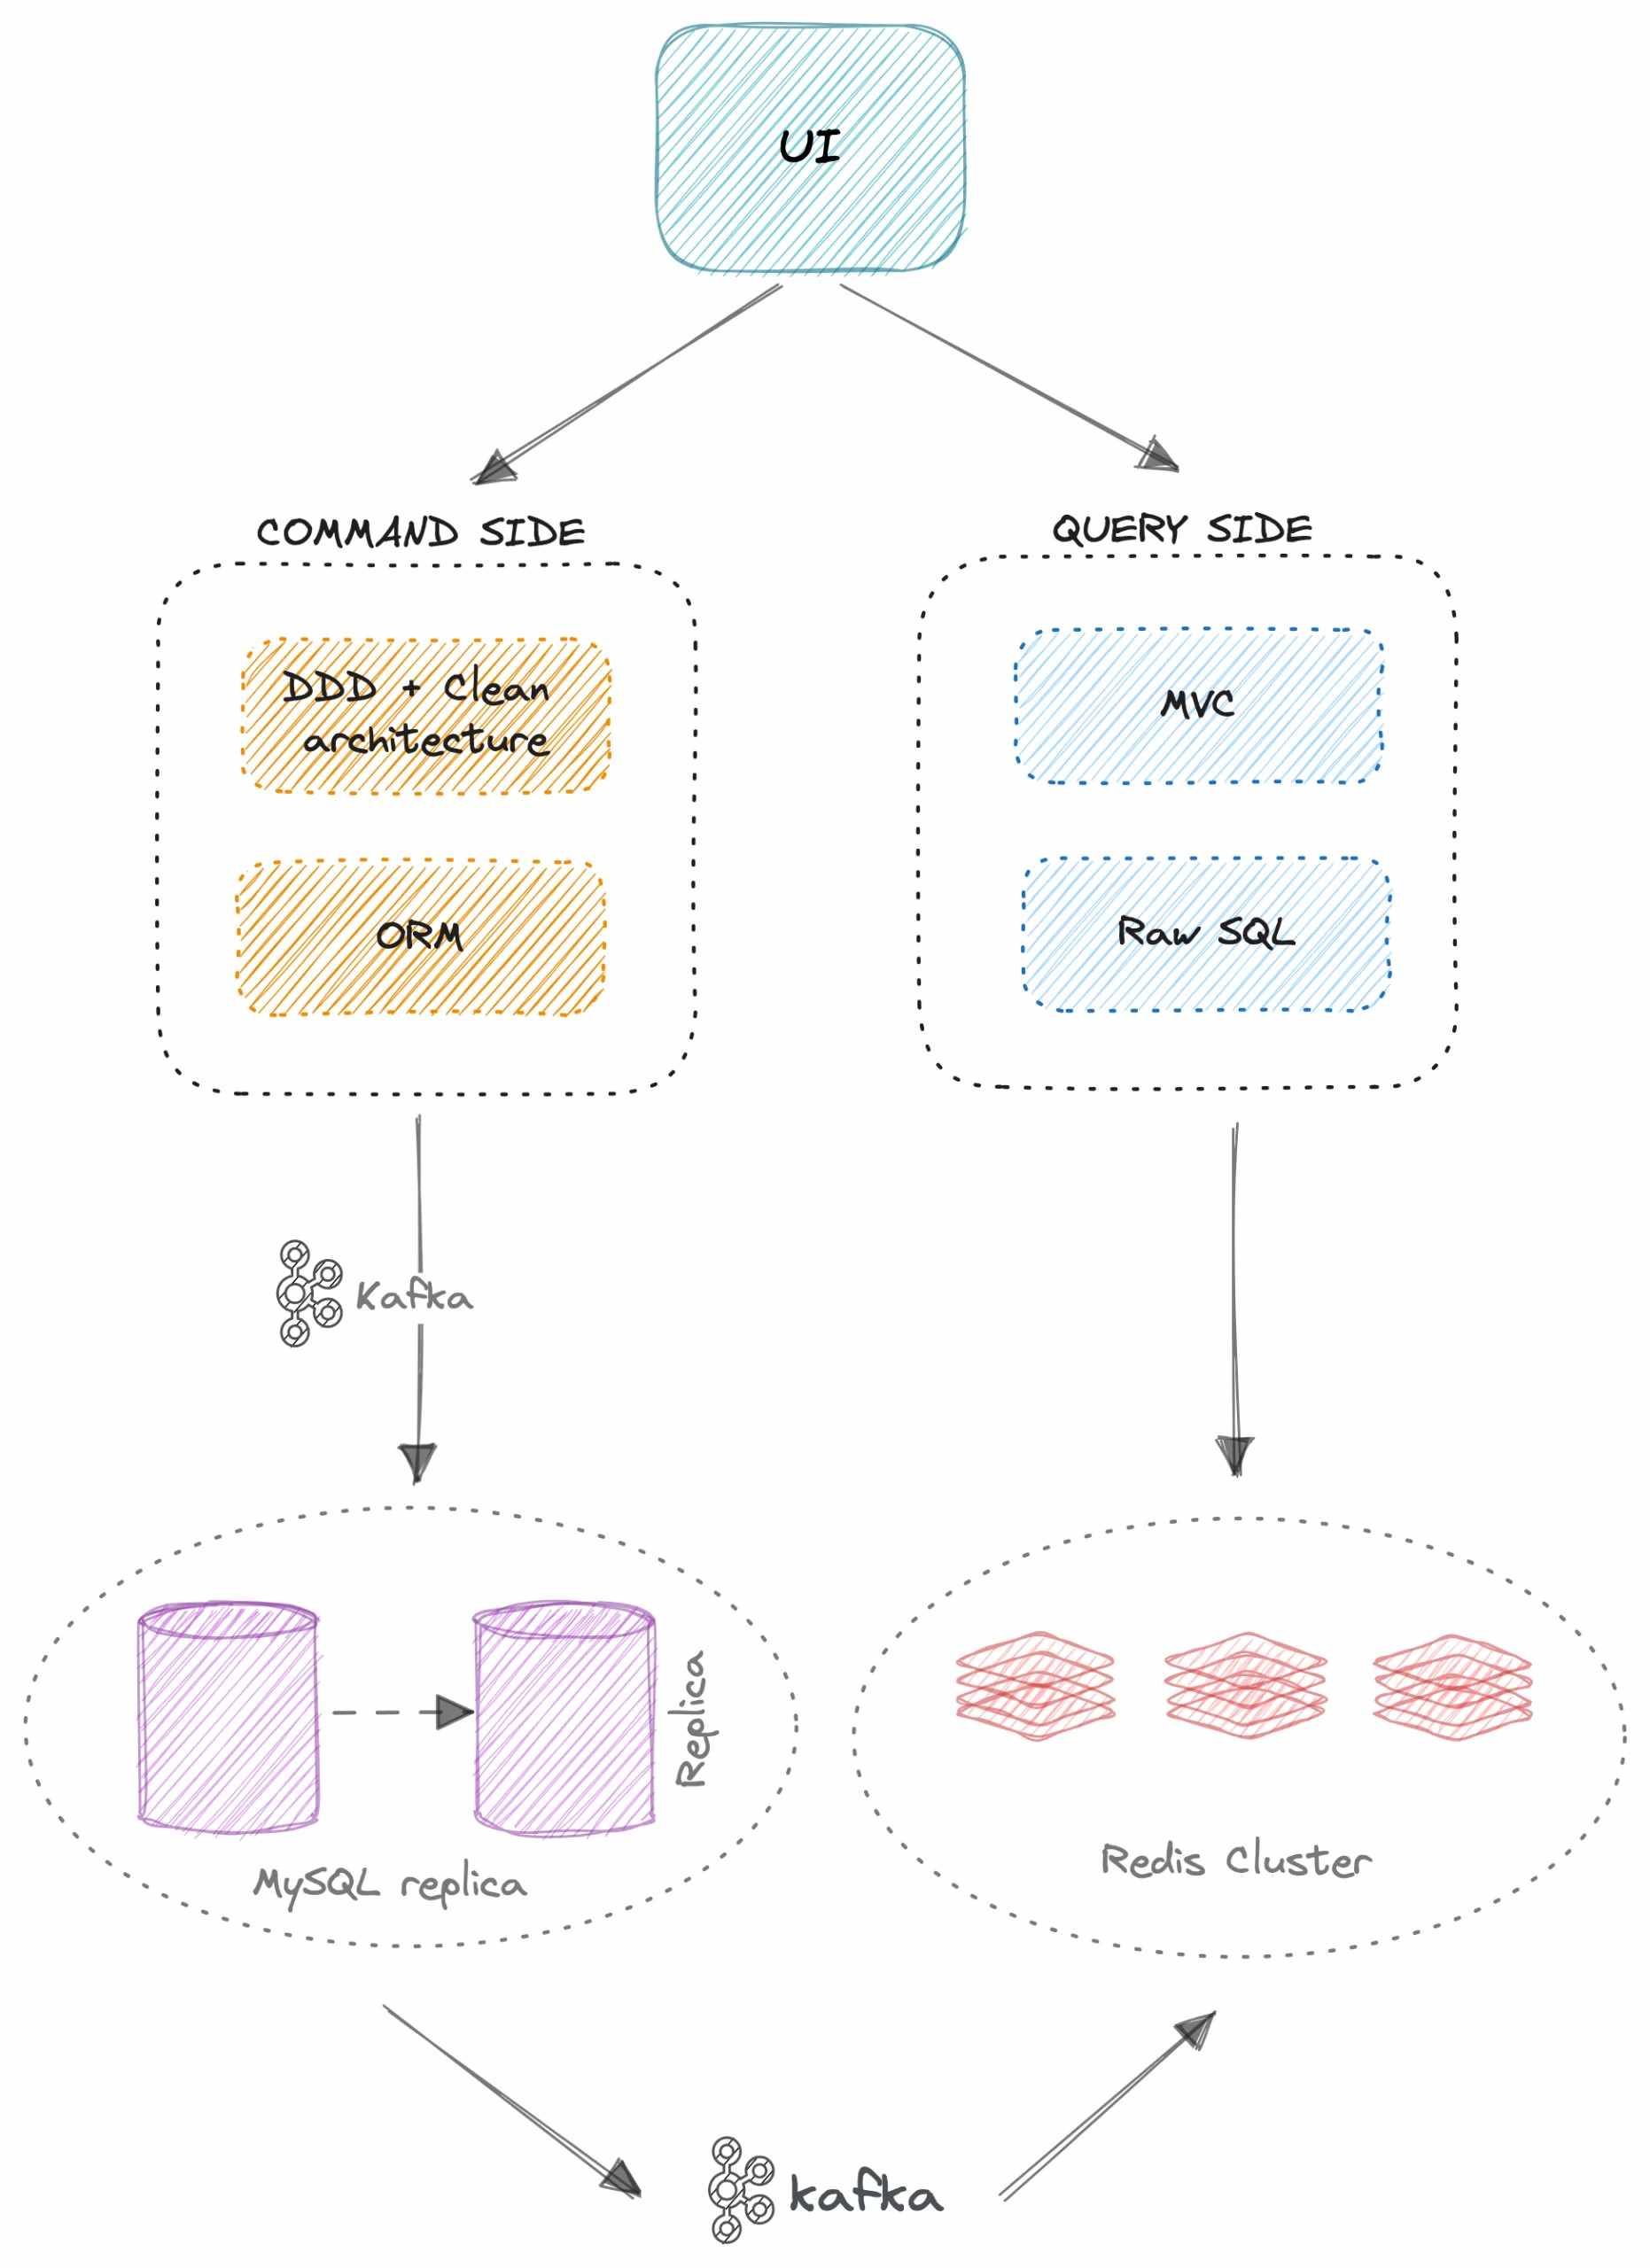 cqrs-distributed-database-scaled